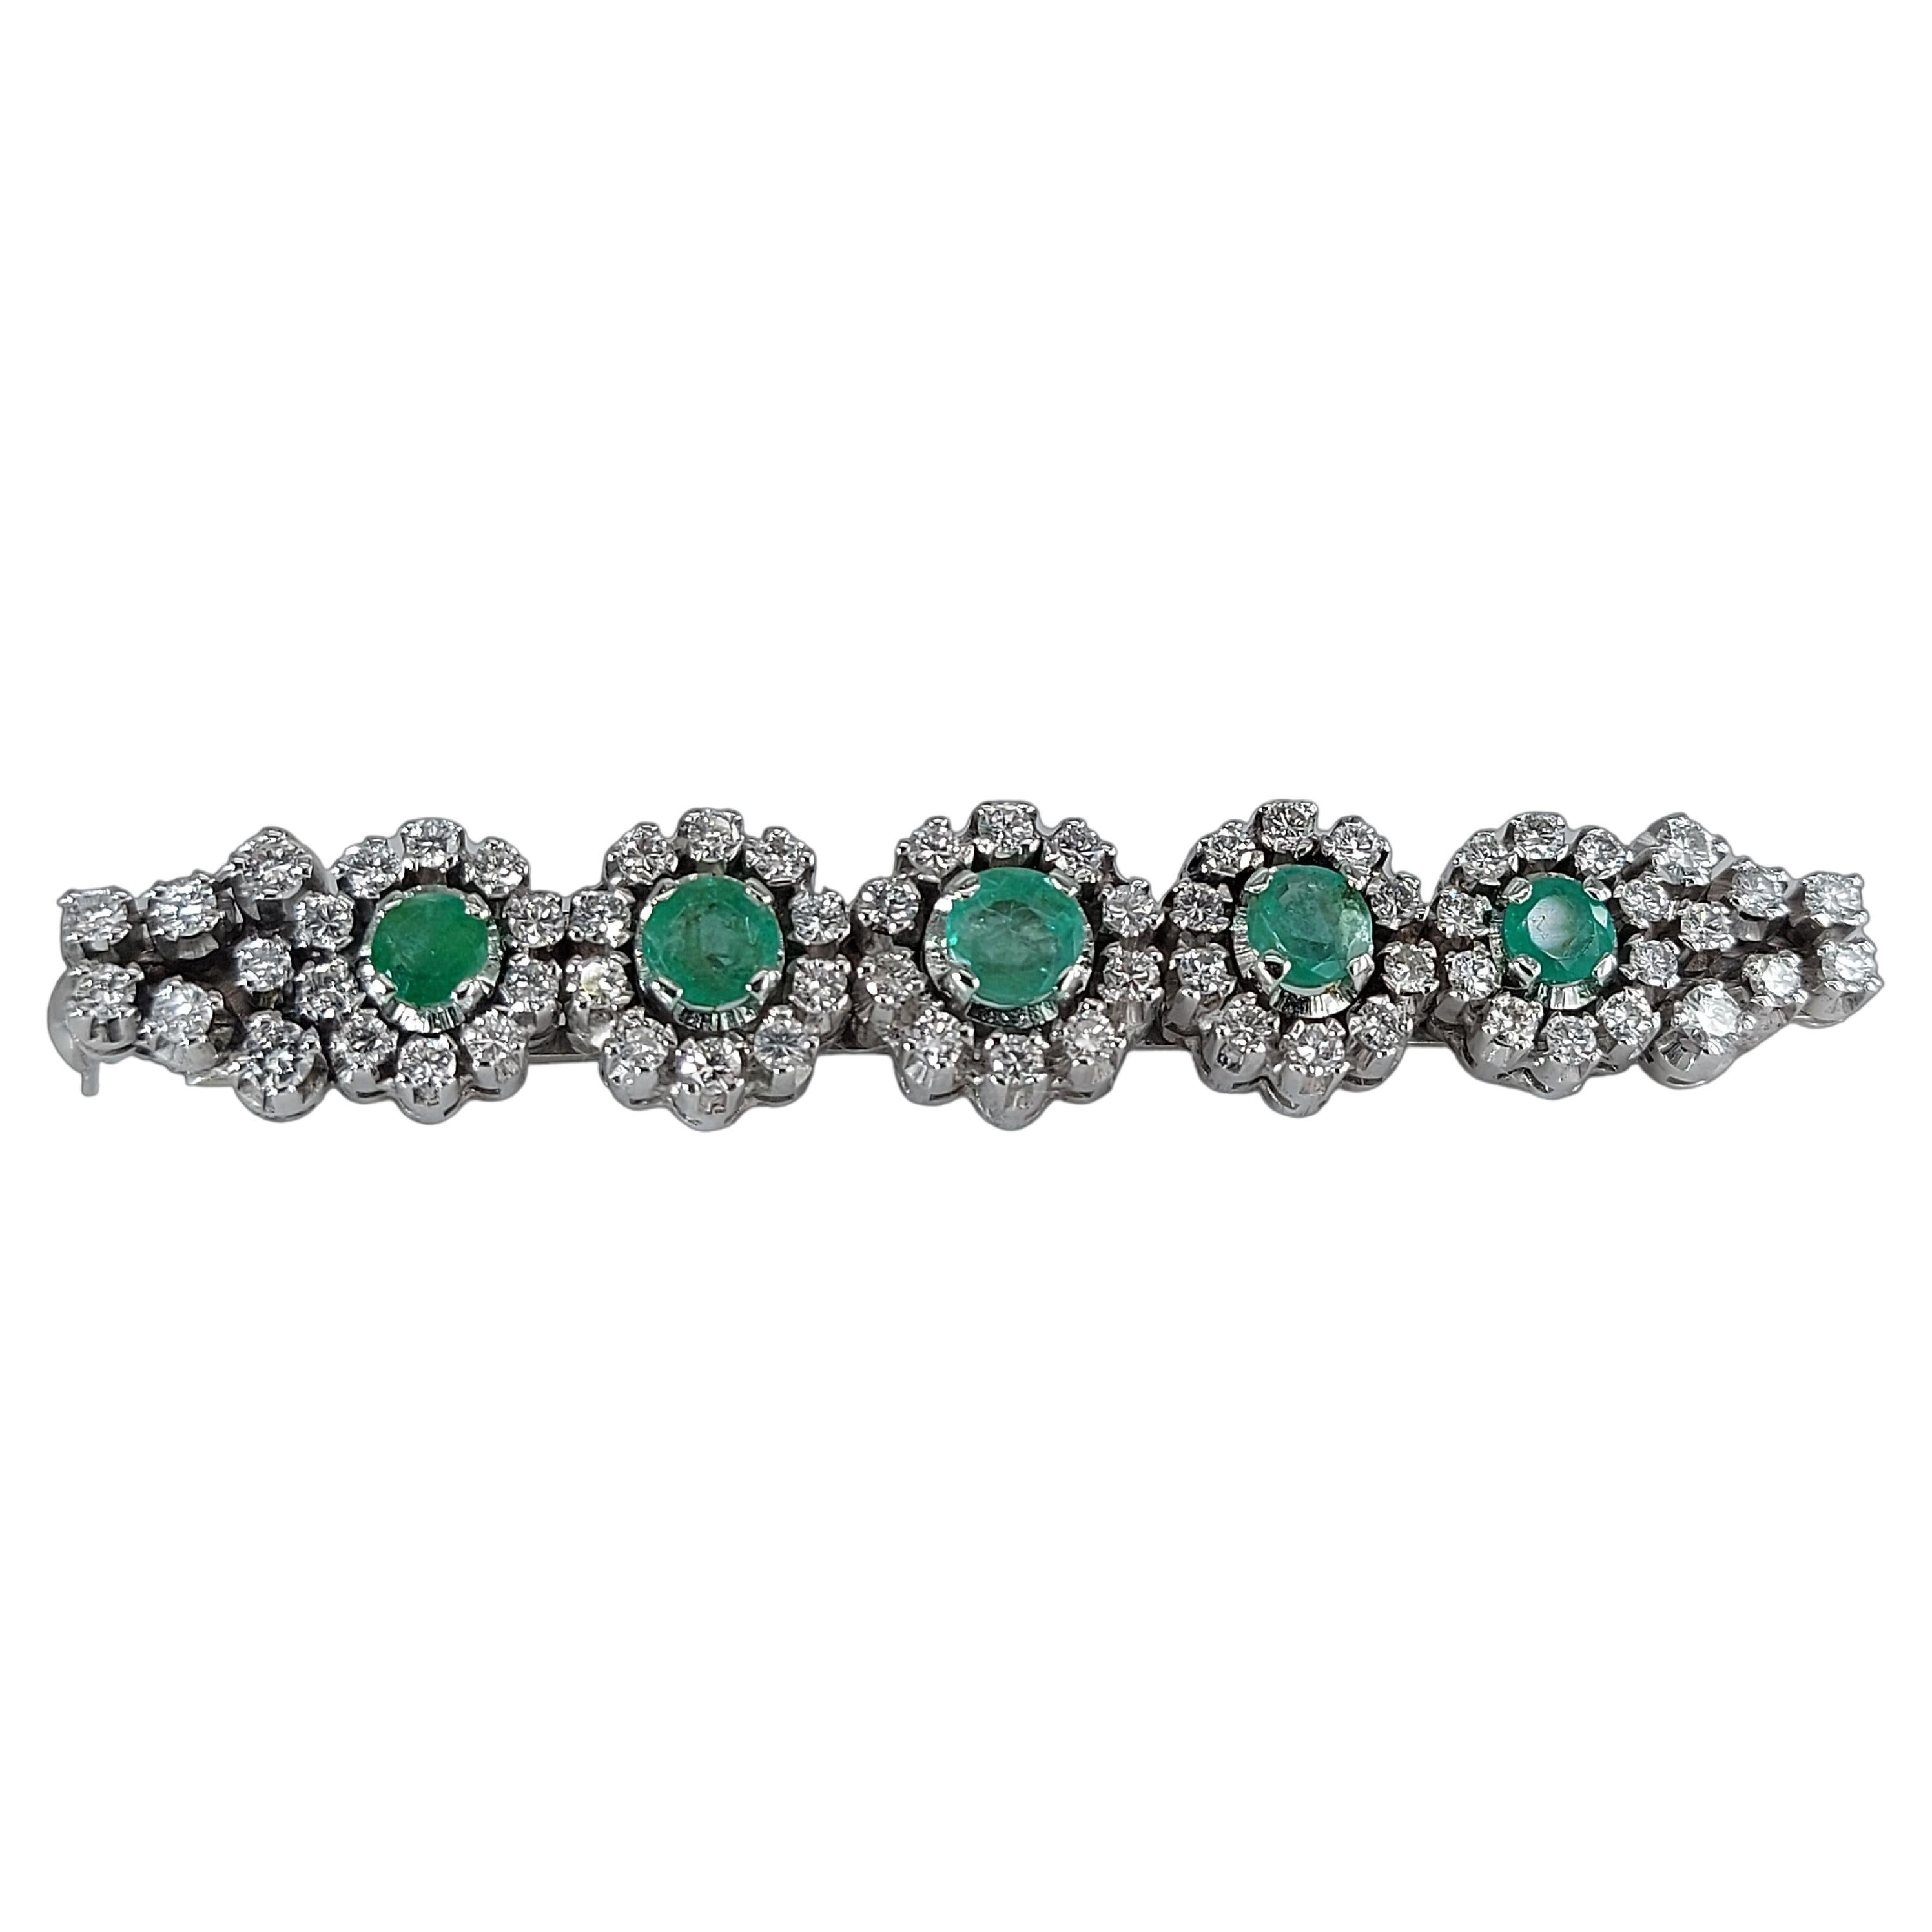 18kt White Gold Brooch with Emeralds & 2.7 Ct Diamonds